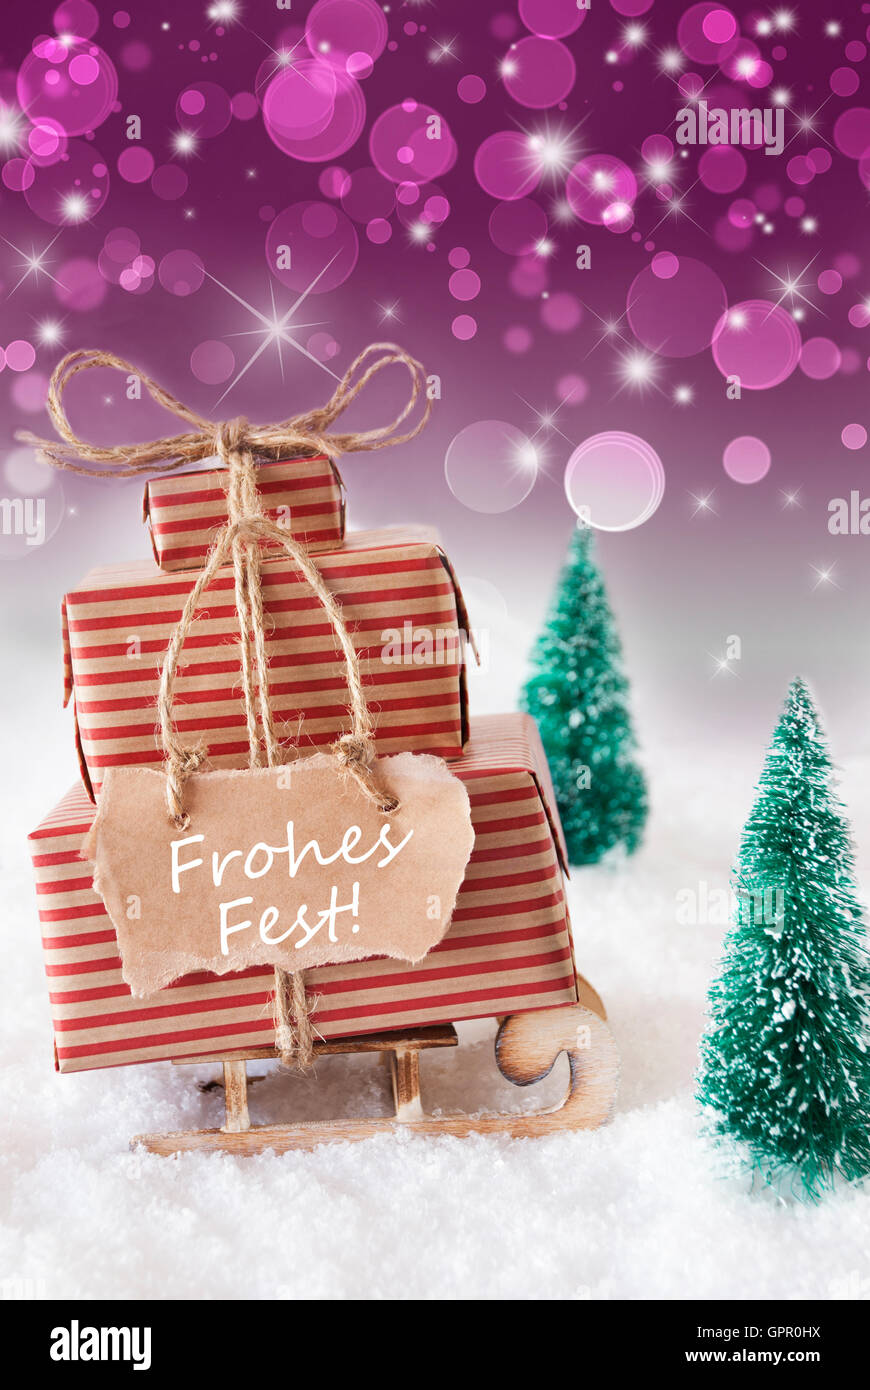 Vertical Sleigh On Purple Background, Frohes Fest Means Merry Christmas Stock Photo